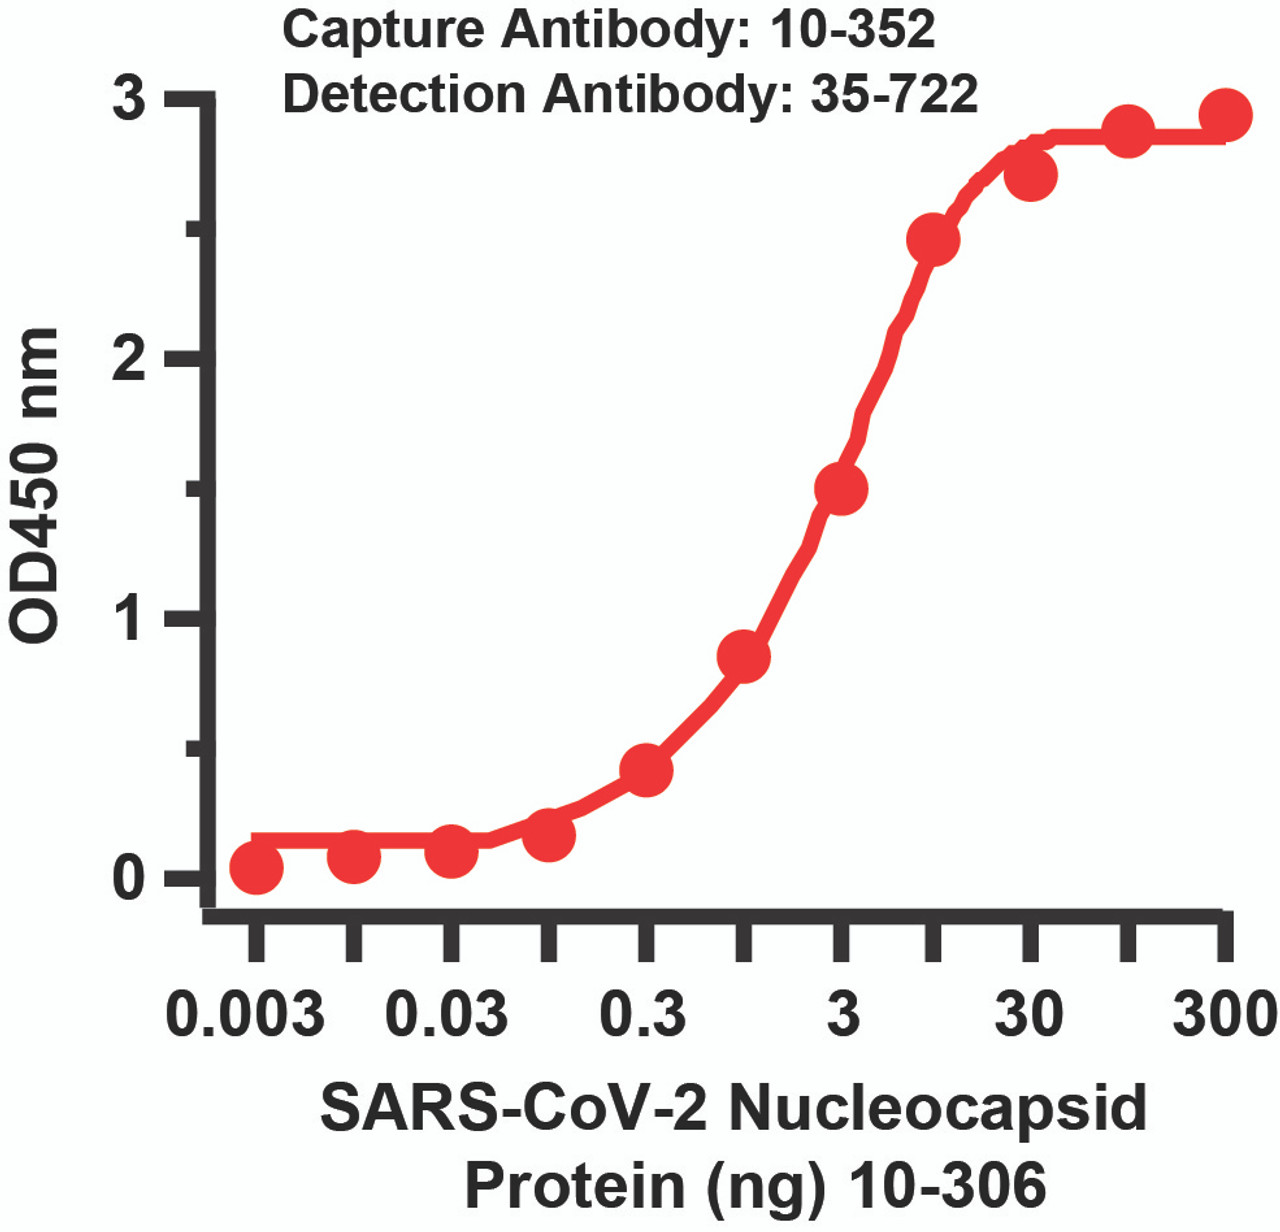 Sandwich ELISA for SARS-CoV-2 (COVID-19) Matched Pair Nucleocapsid Antibodies
Antibodies: SARS-CoV-2 (COVID-19) Nucleocapsid Antibodies, 10-352 and 35-722. A sandwich ELISA was performed using SARS-CoV-2 Nucleocapsid antibody (10-352, 5ug/ml) as capture antibody, the Nucleocapsid recombinant protein as the binding protein (10-306), and the anti-SARS-CoV-2 Nucleocapsid antibody (35-722, 1ug/ml) as the detection antibody. Secondary: Goat anti-mouse IgG HRP conjugate at 1:20000 dilution. Detection range is from 0.03 ng to 300 ng. EC50 = 2.7 ng